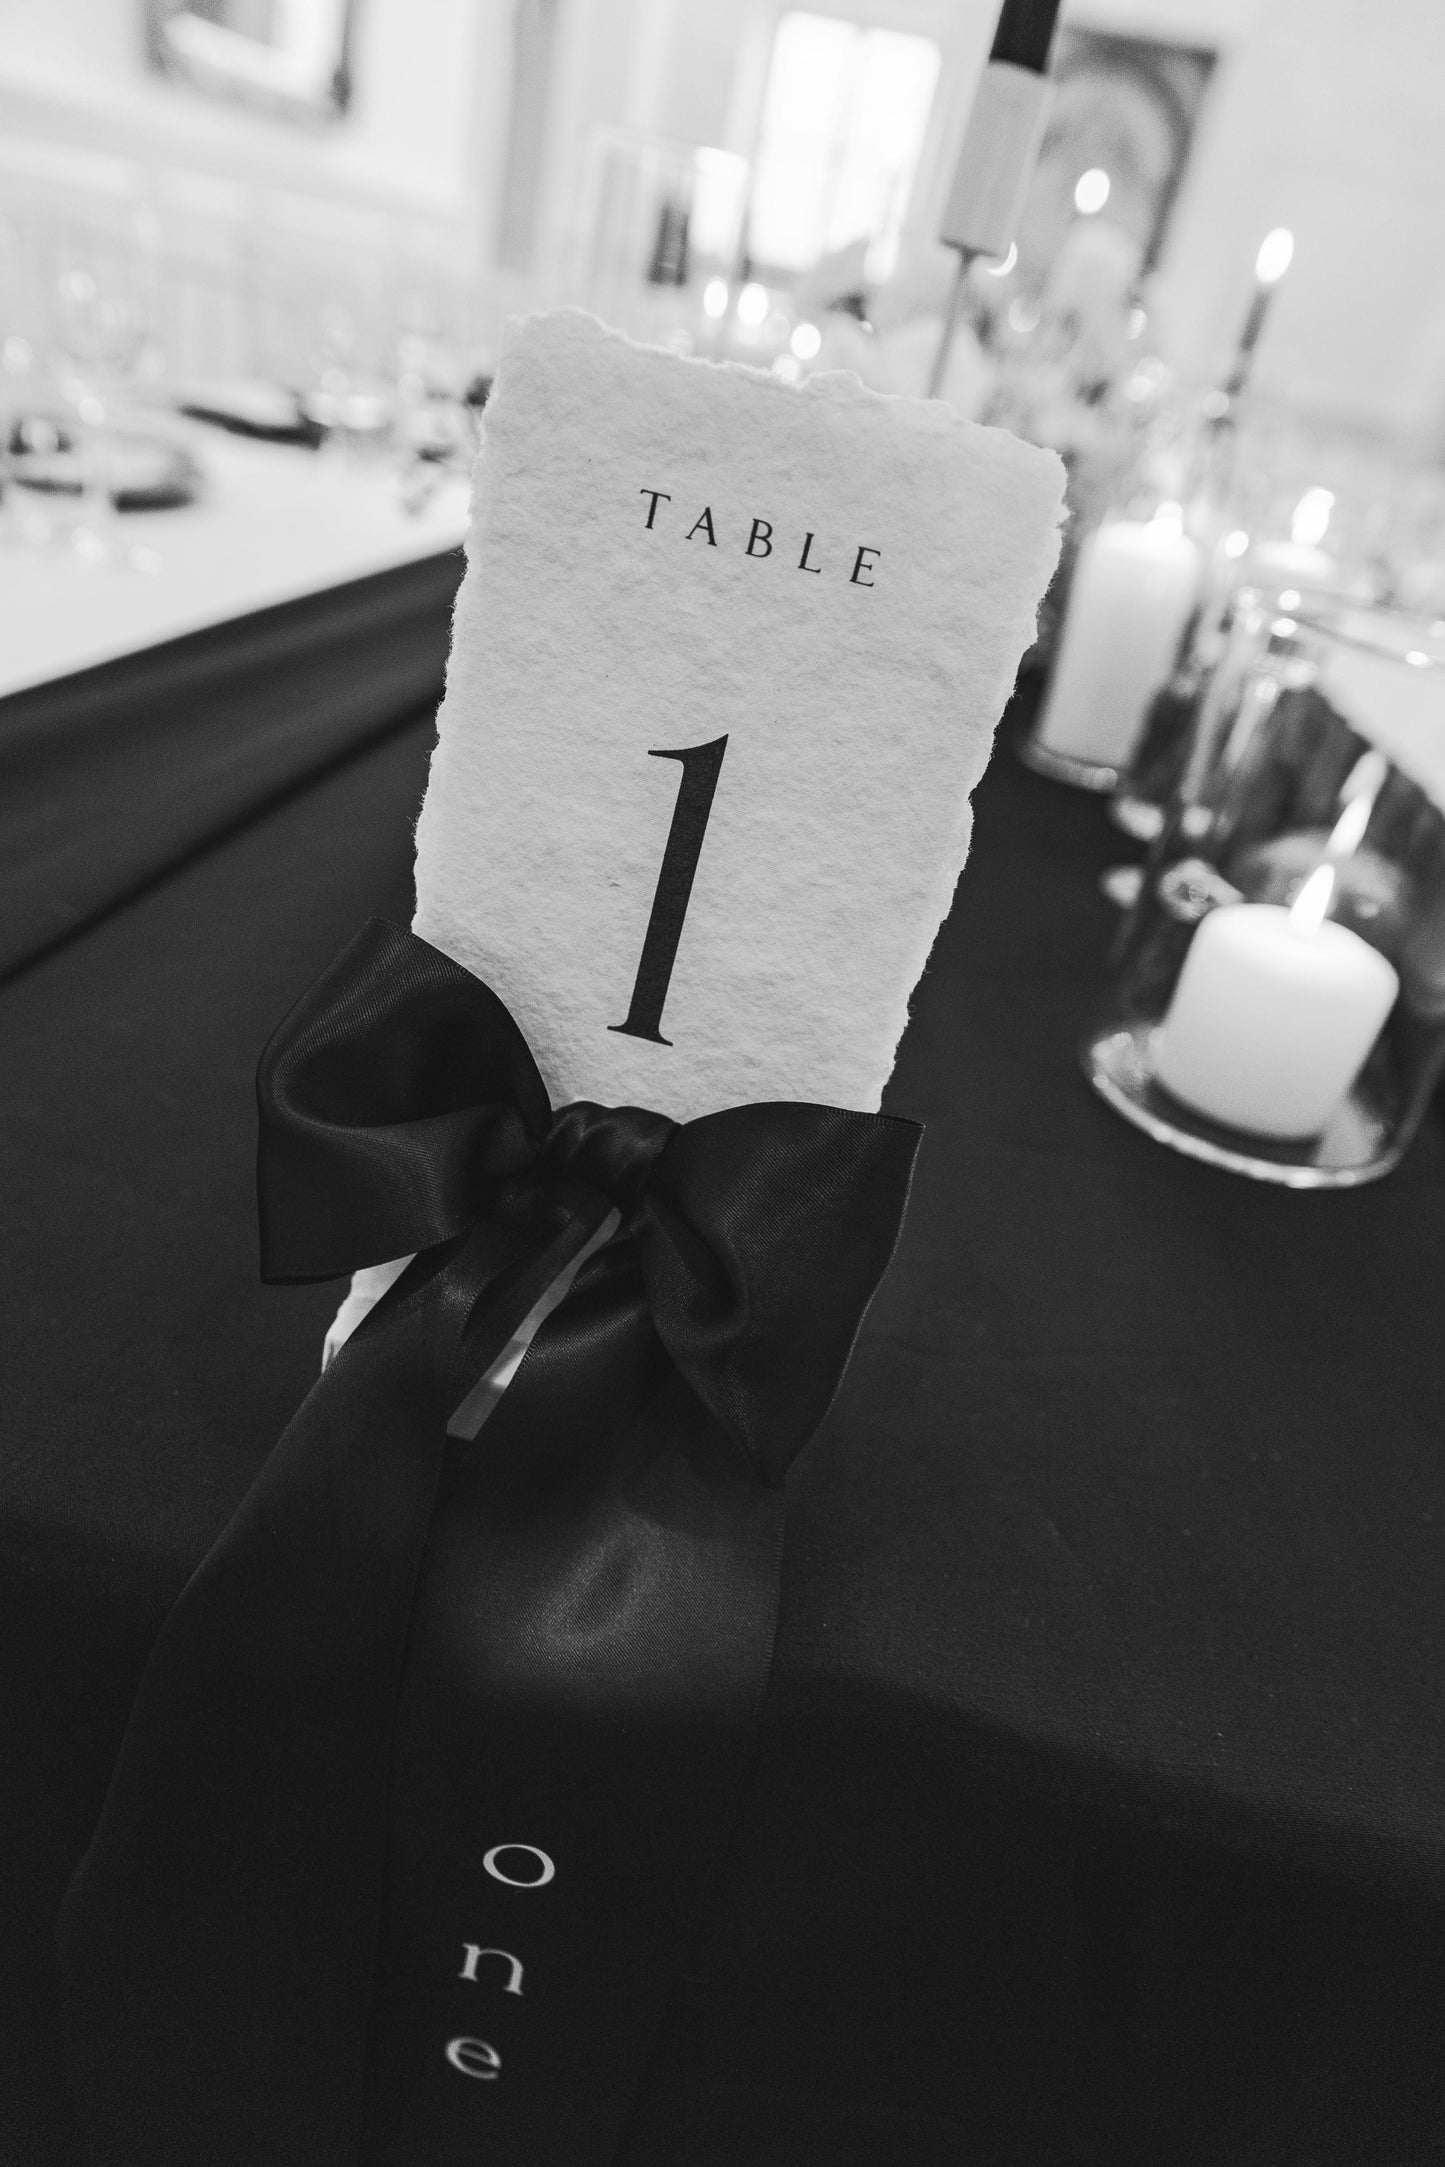 Hand crafted Monochrome Table number with Black Satin Bow